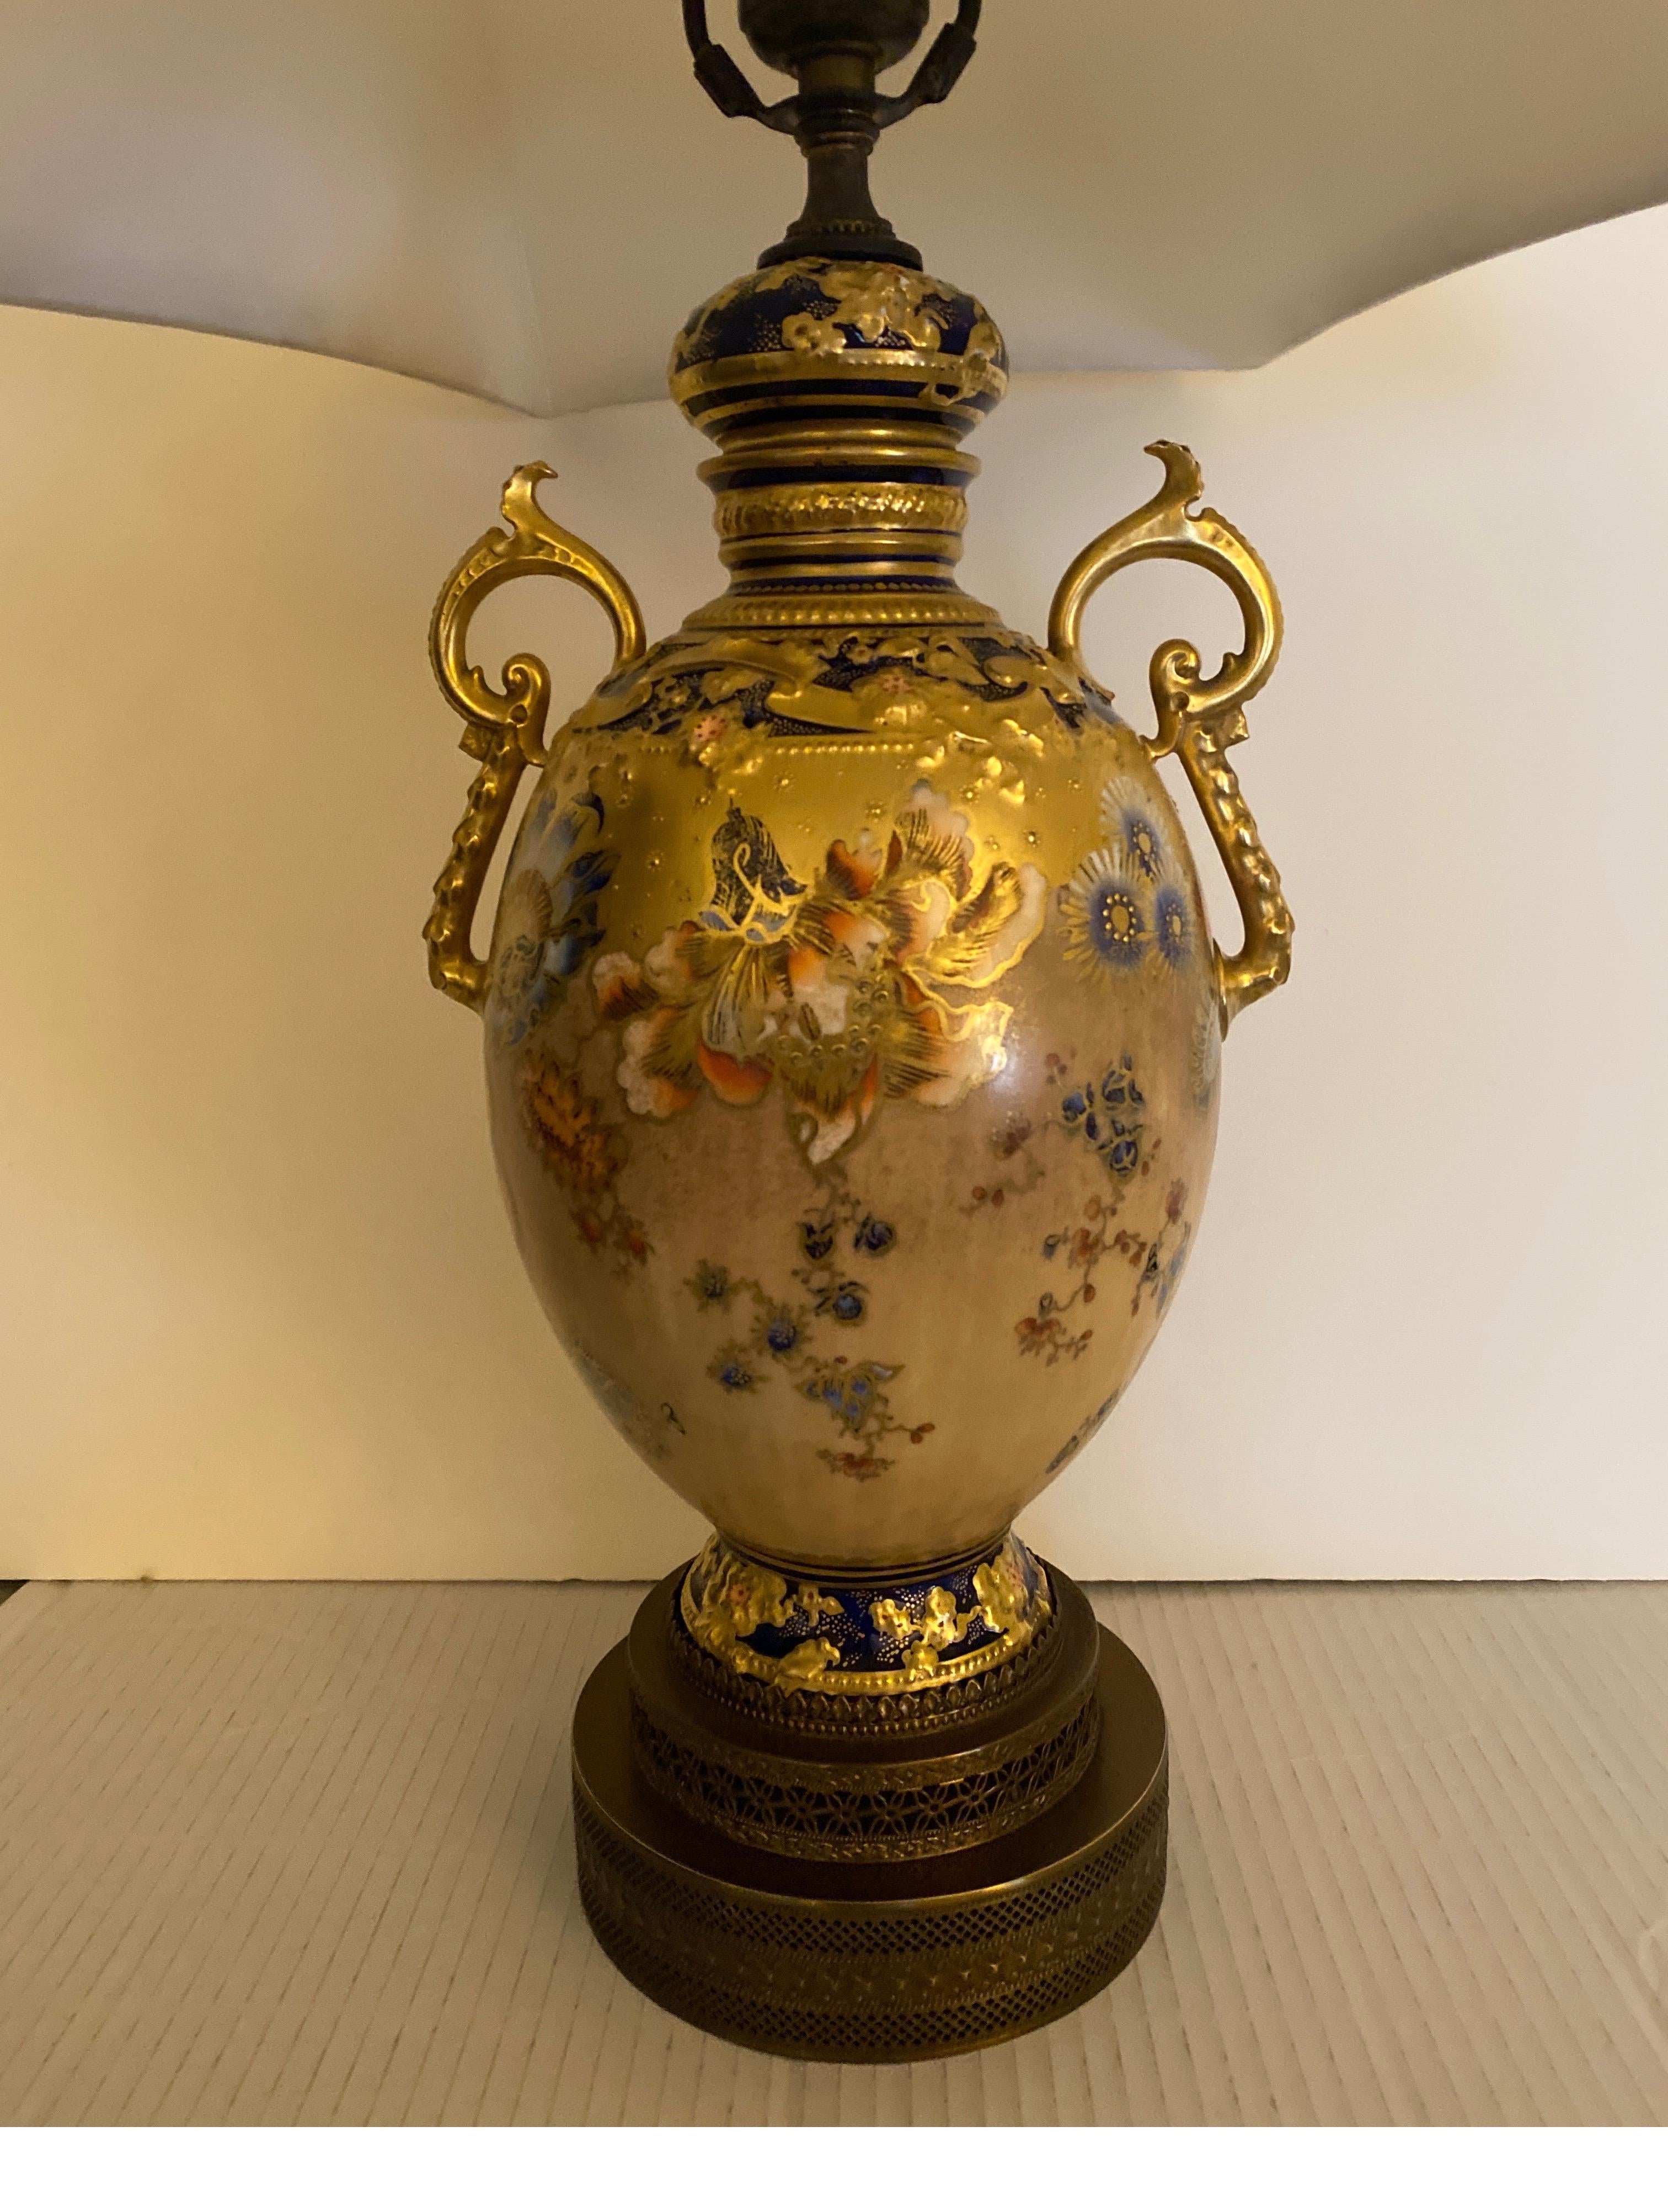 Stunning hand painted and gilt Royal Crown Derby urn now as a lamp. The detailed painted urn with exotic floral decoration with lavish gold trim and cobalt accent color. The porcelain was lamped in the early part of the 20th Century, paired with a